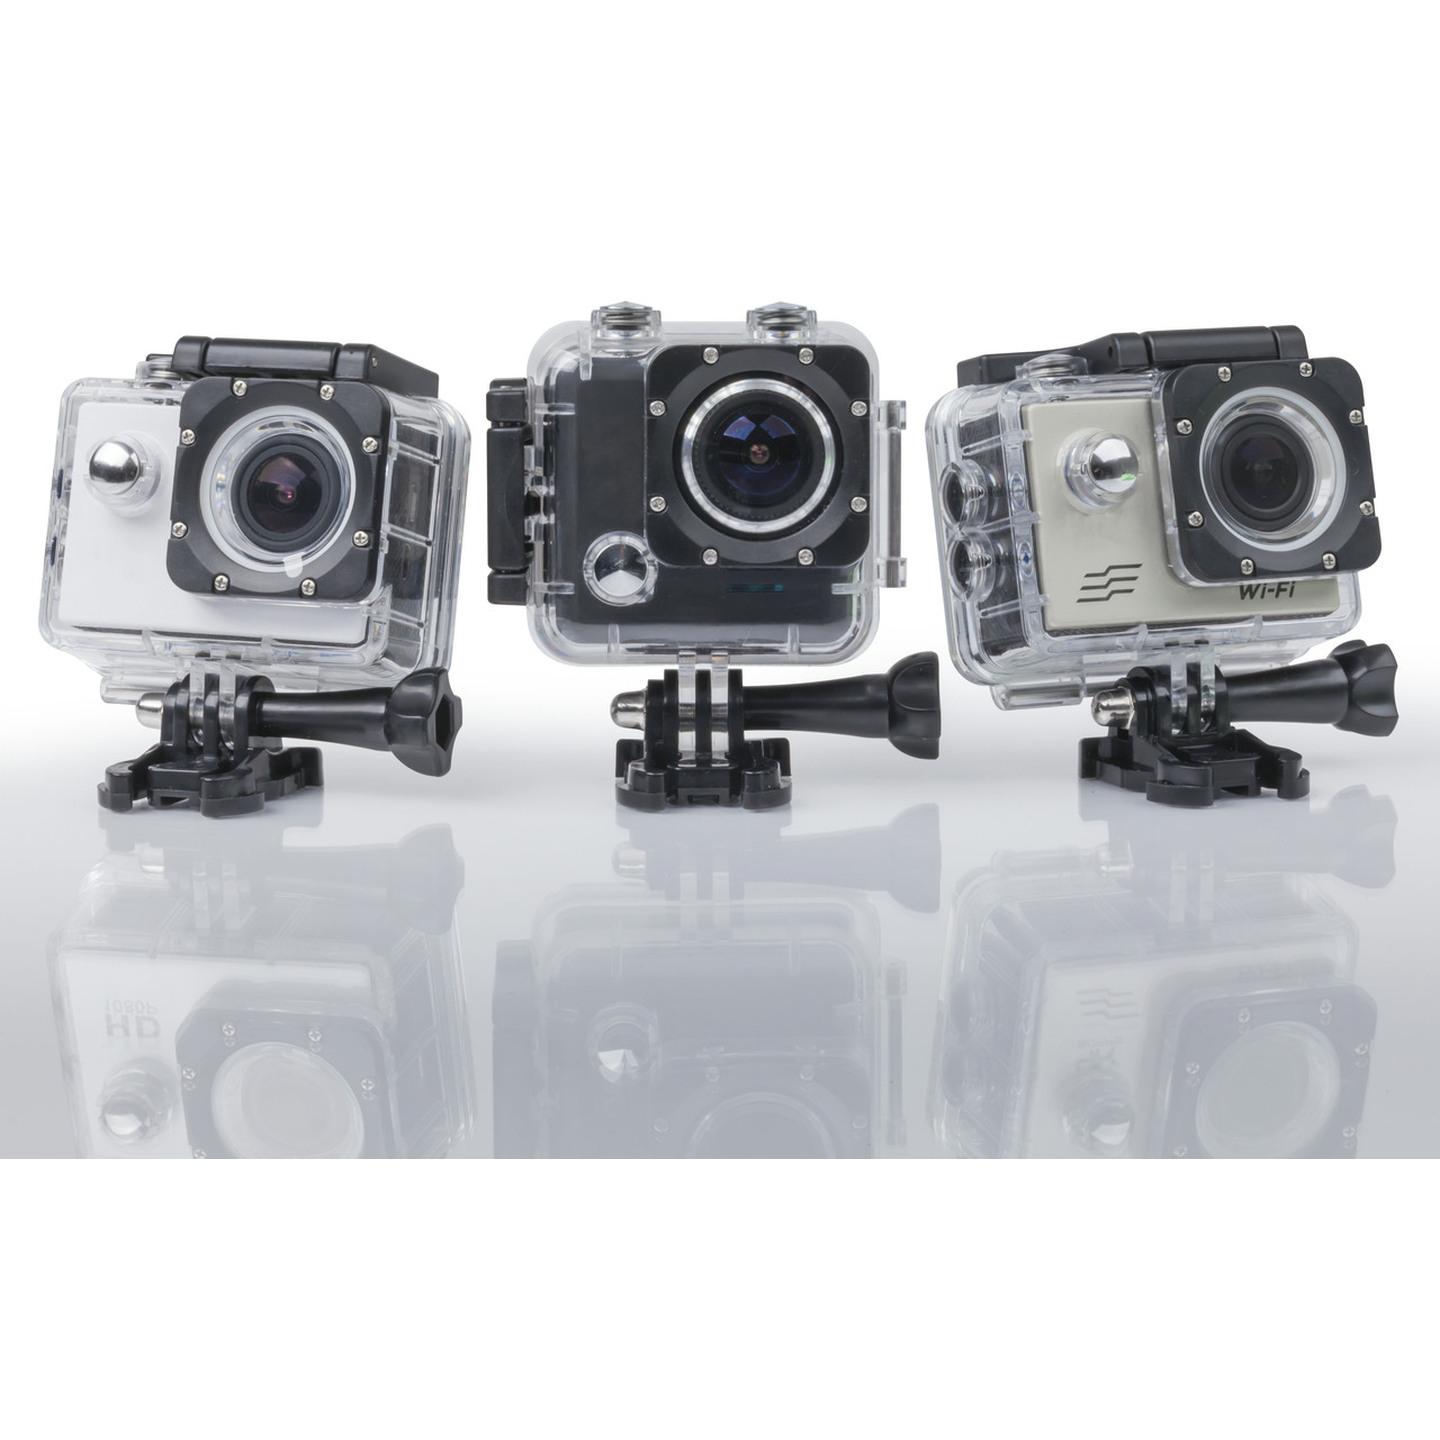 1080p Action Camera with LCD